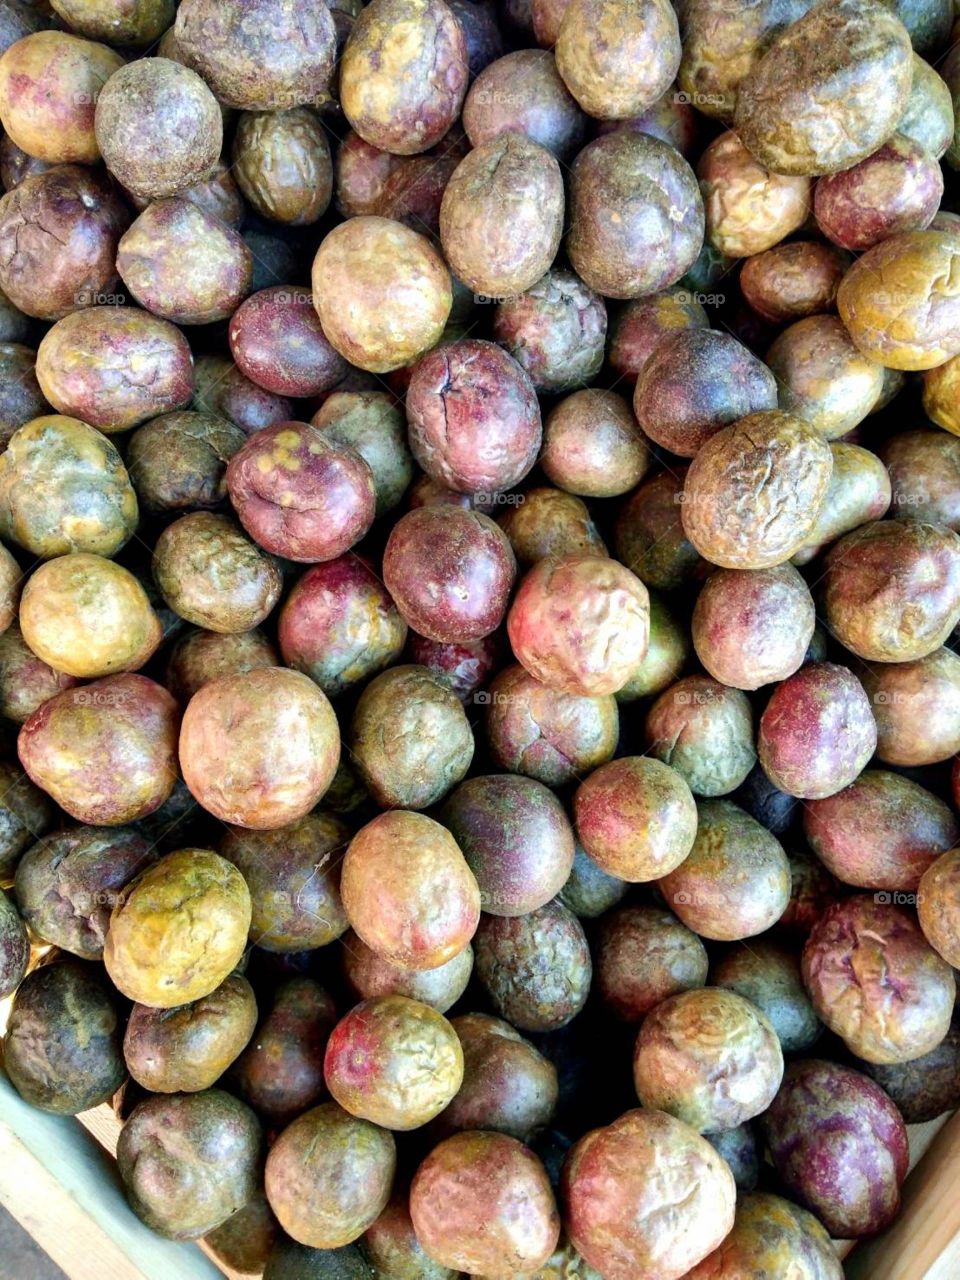 Passion fruit for sale in market.